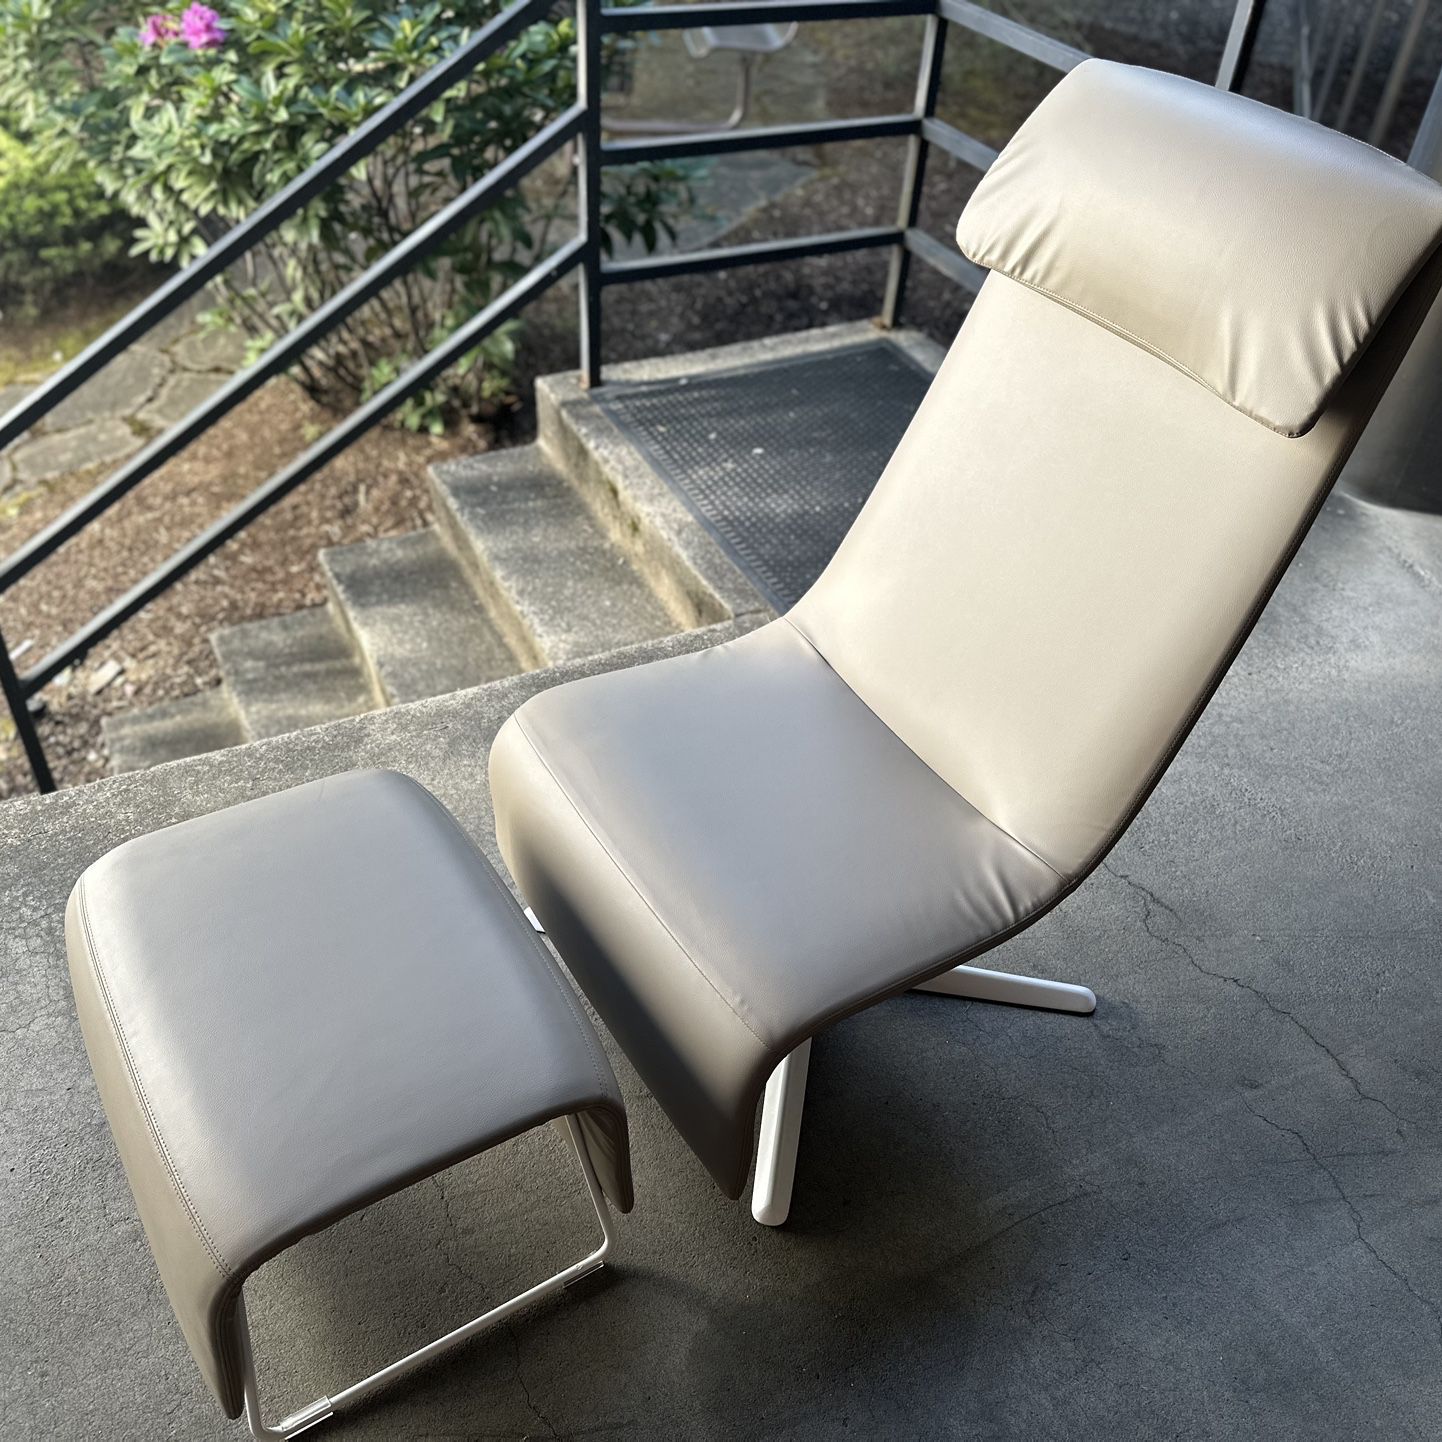 High End Teknion Lounge Chair Faux Leather, Foot Rest Included